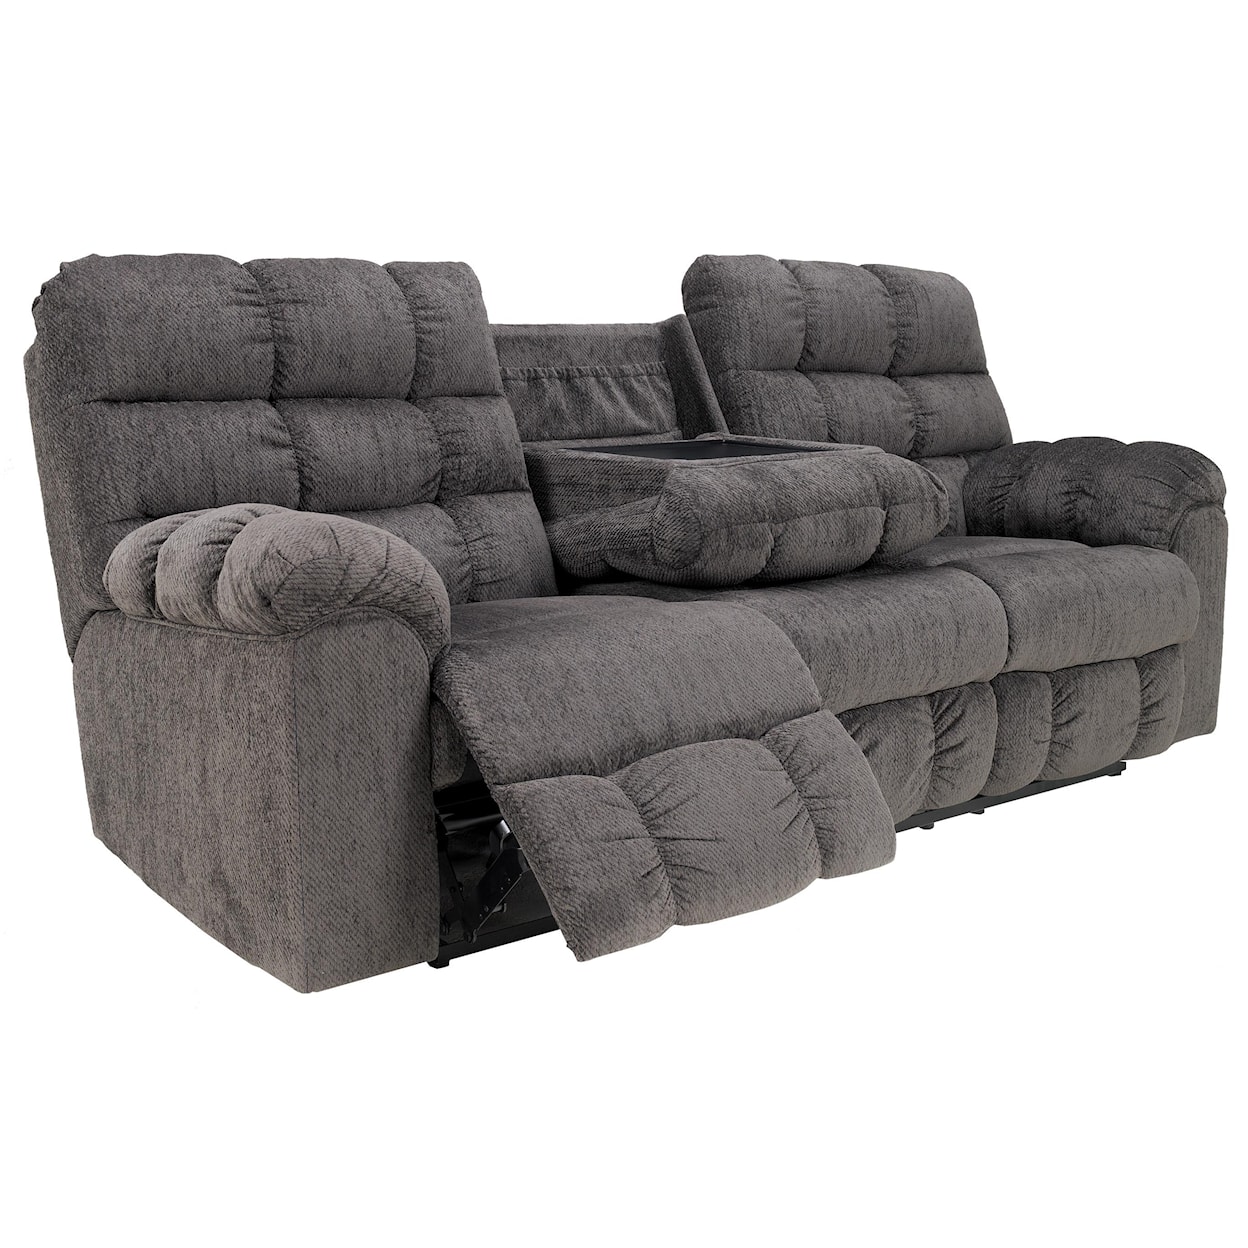 Signature Design by Ashley Furniture Acieona Reclining Sofa with Drop Down Table